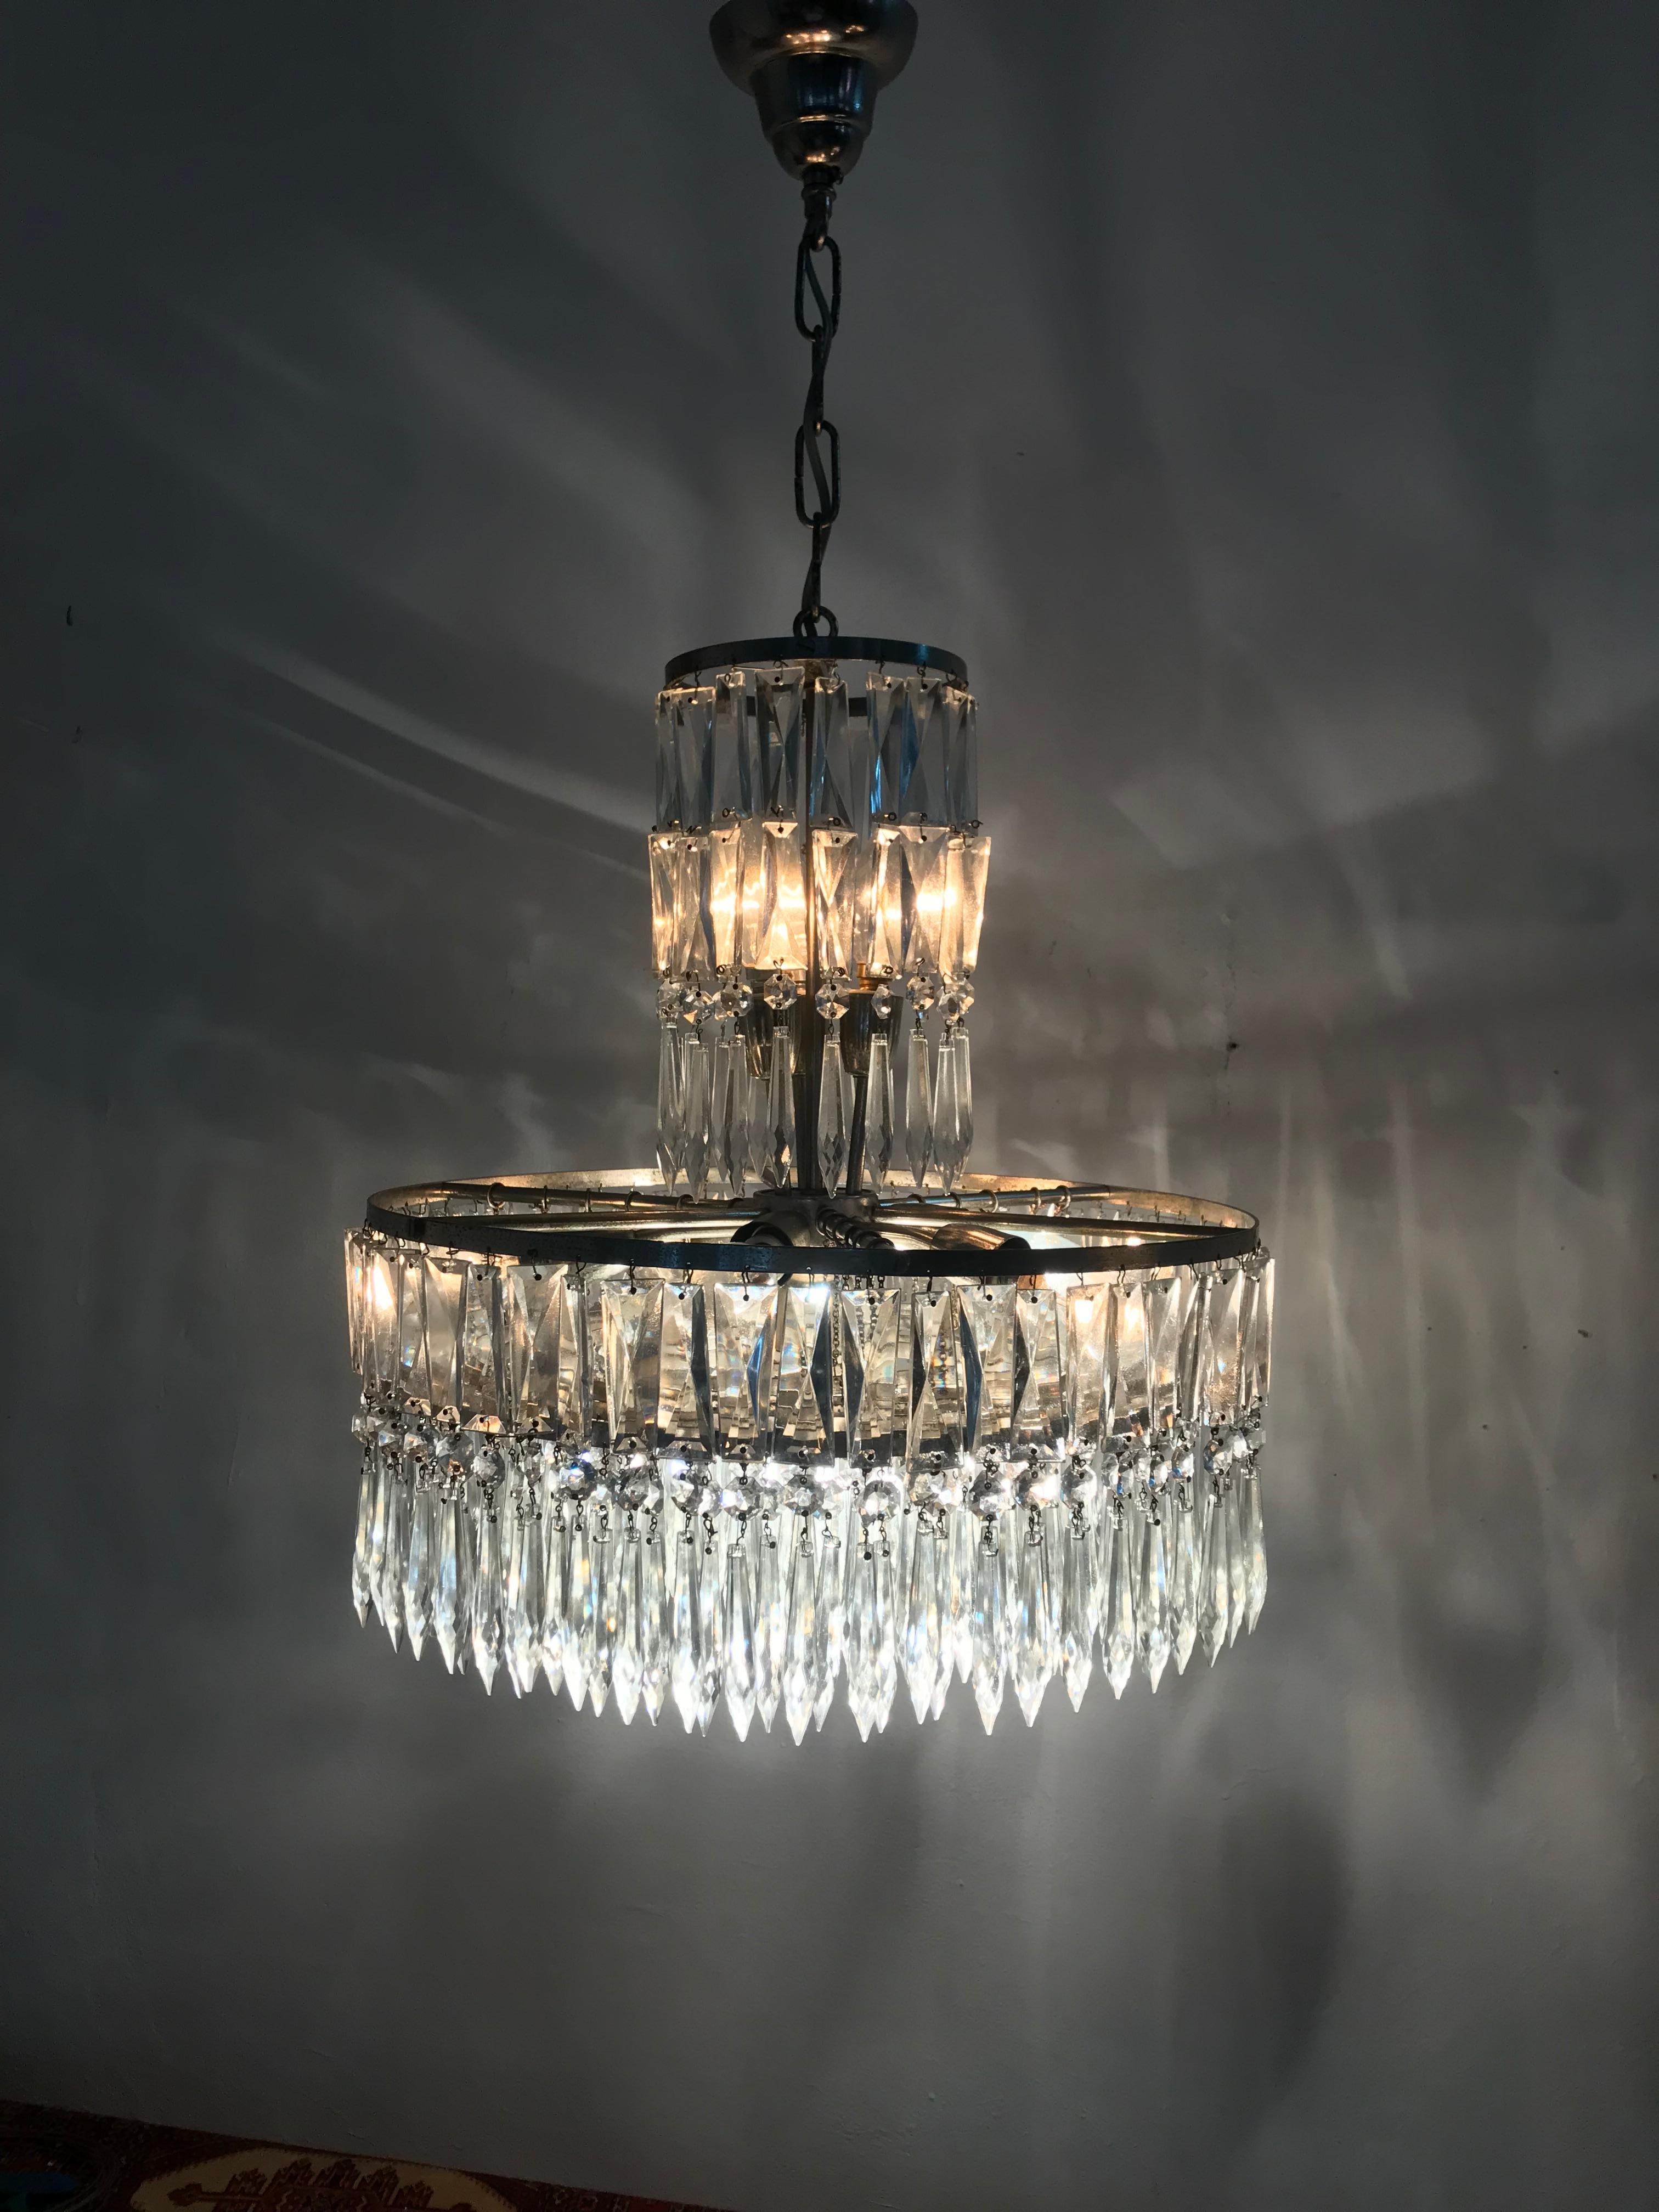 Identical pair of 10 light French Art Deco chandeliers, in nickeled steel and a few hundred cut lead crystal prisms. Made in France, circa 1940.
Priced individually.